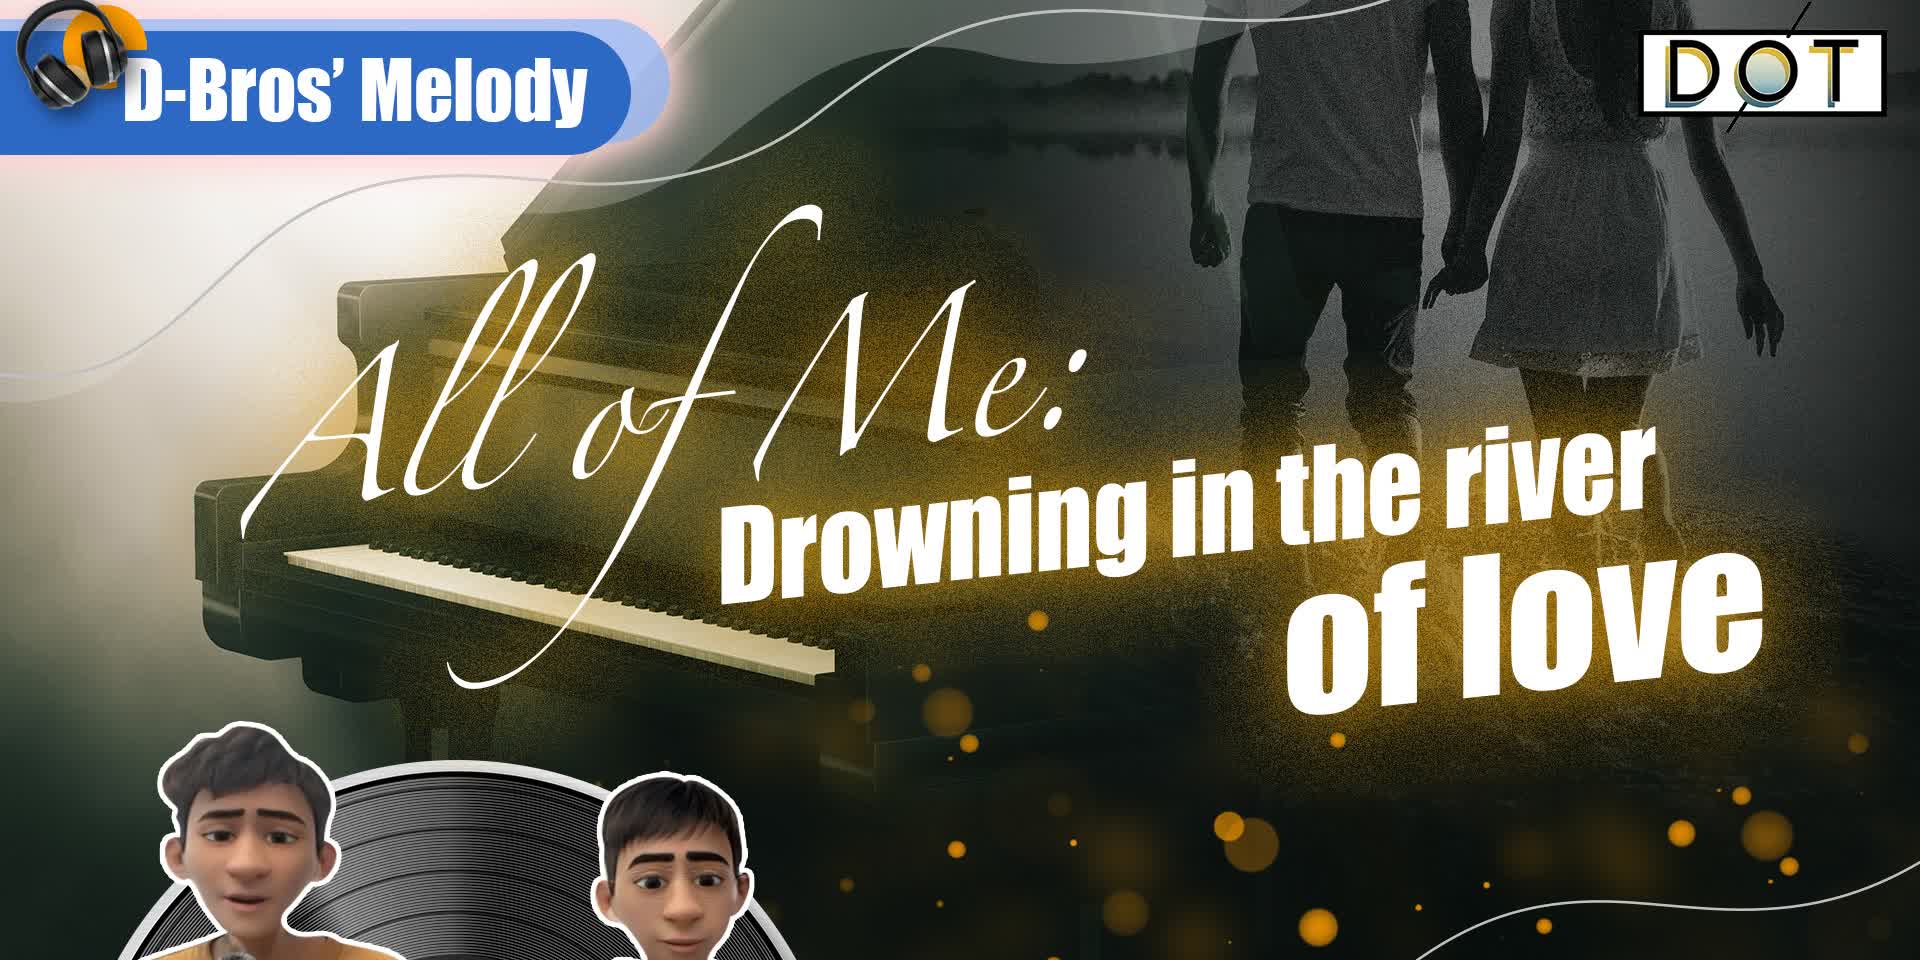 D-Bros' Melodies | All of Me: Drowning in the river of love